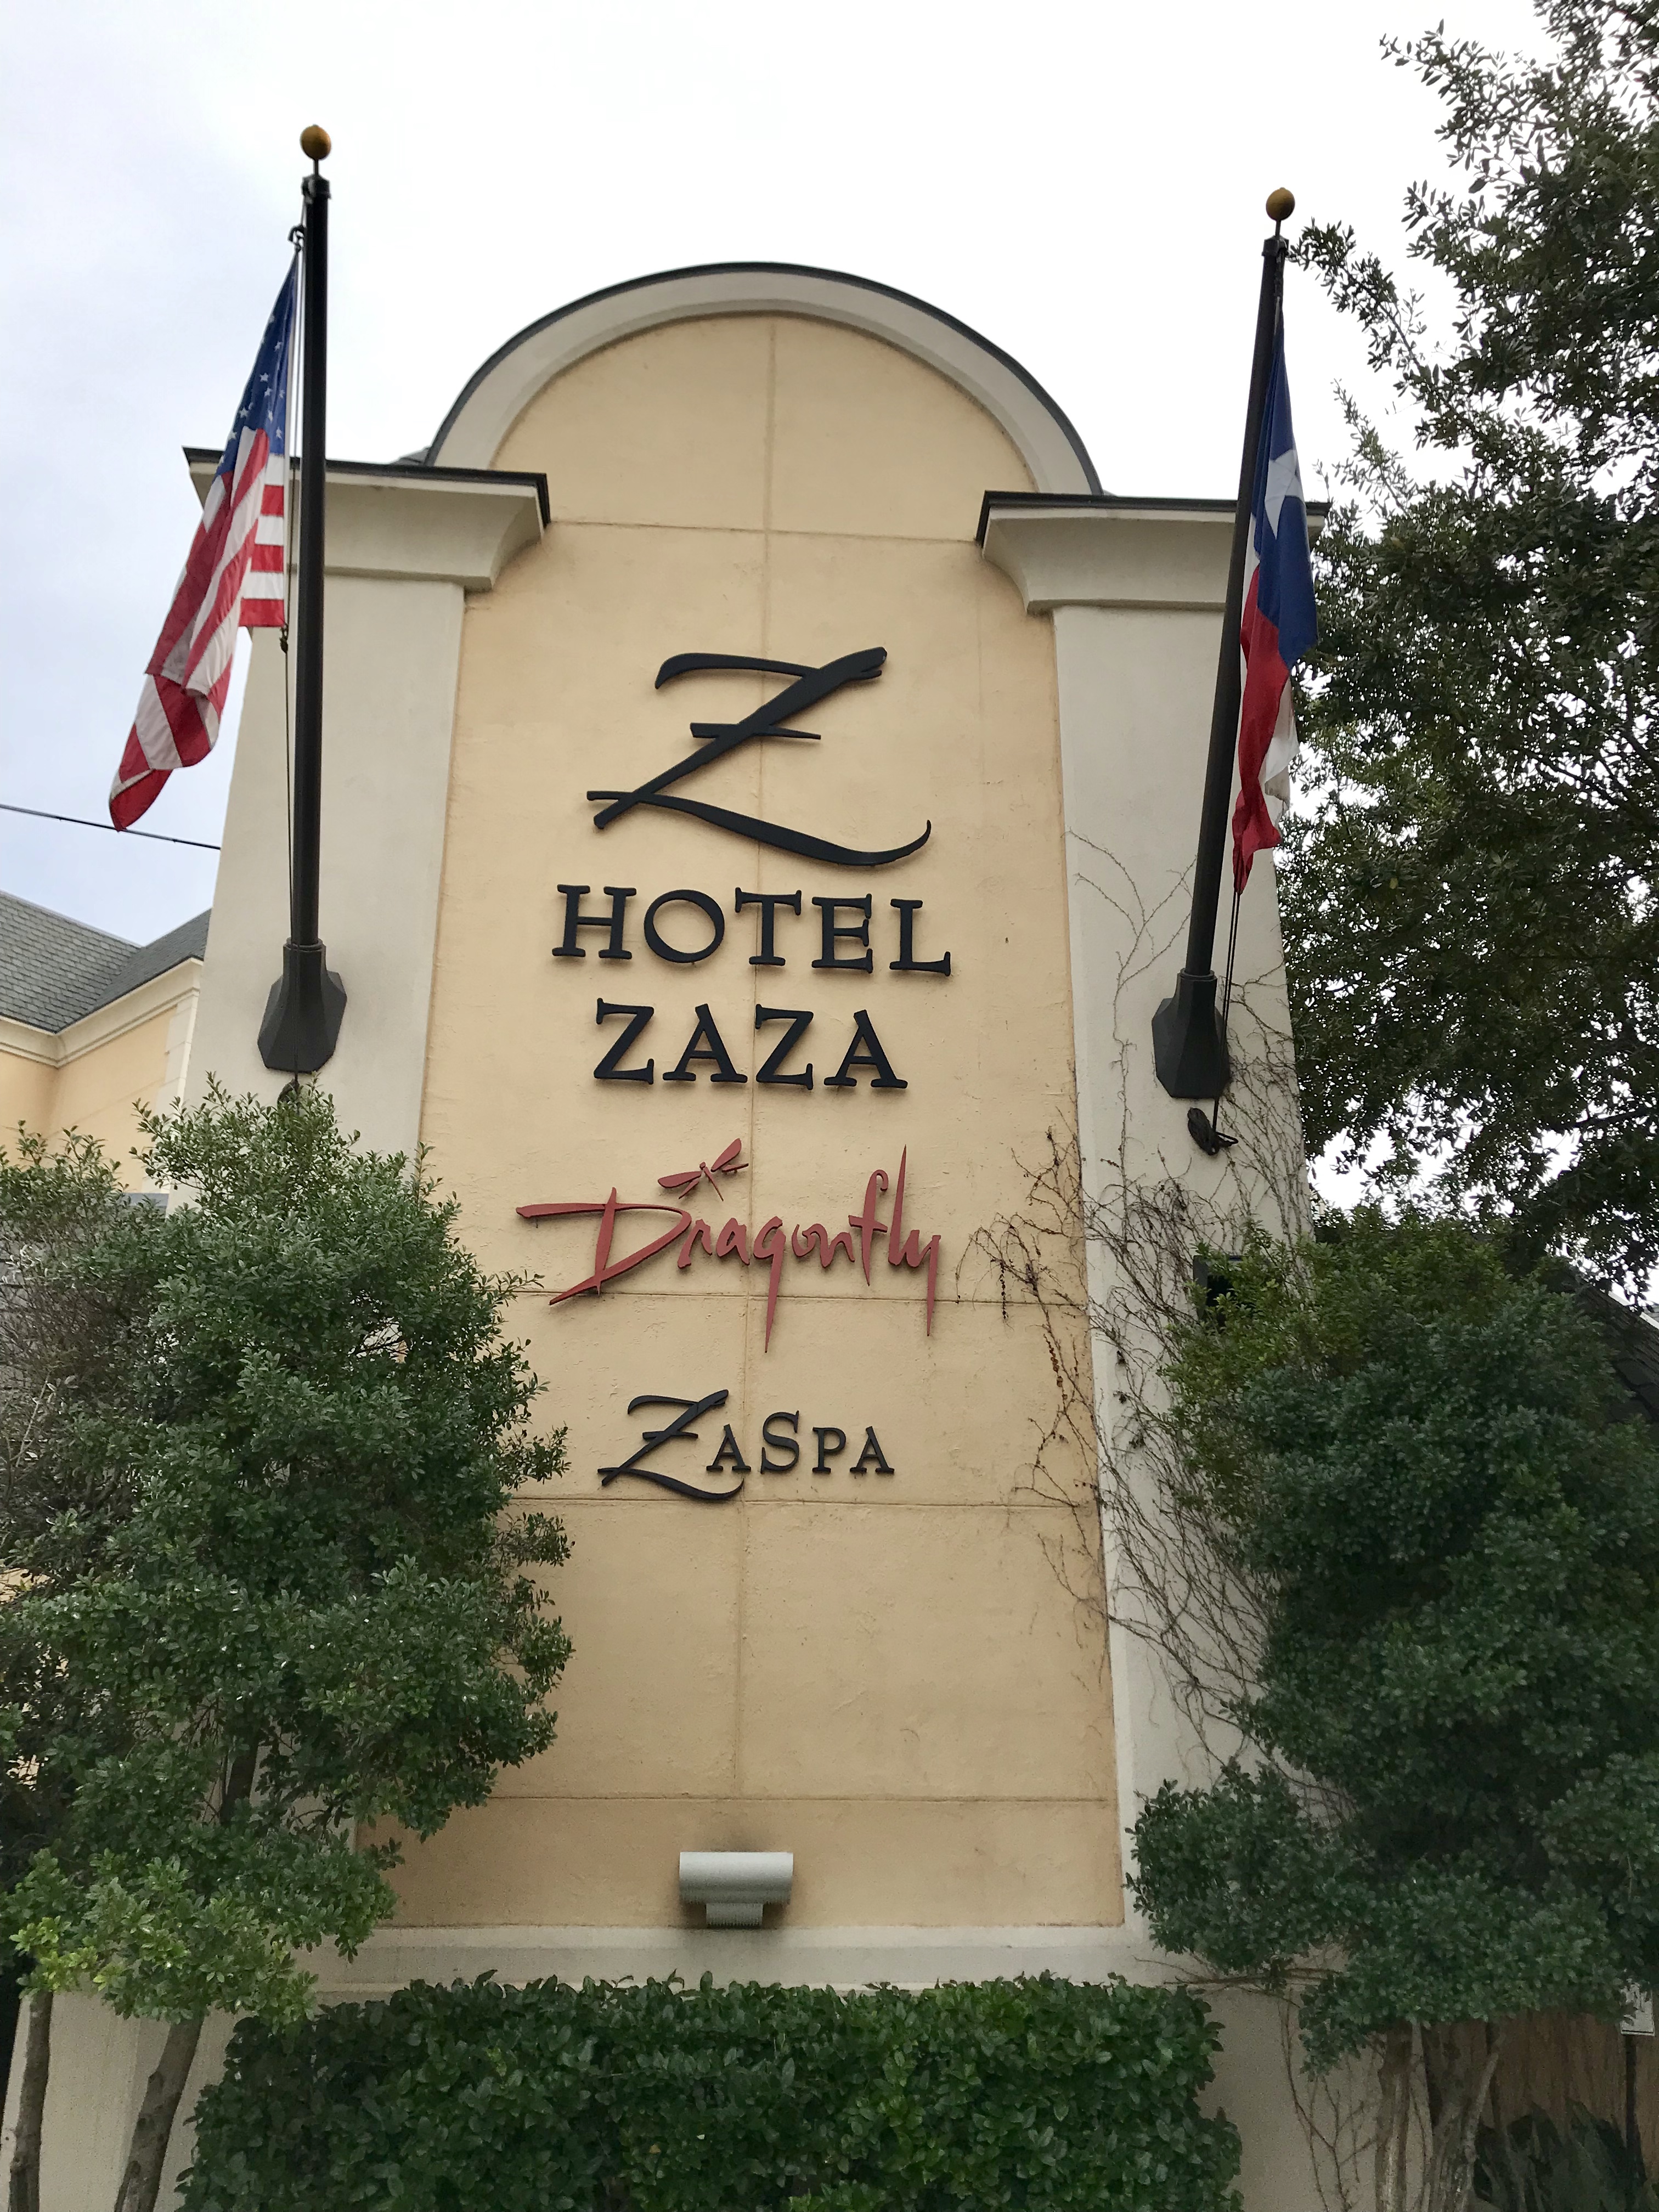 You are currently viewing Hotel ZAZA, Dallas,TX